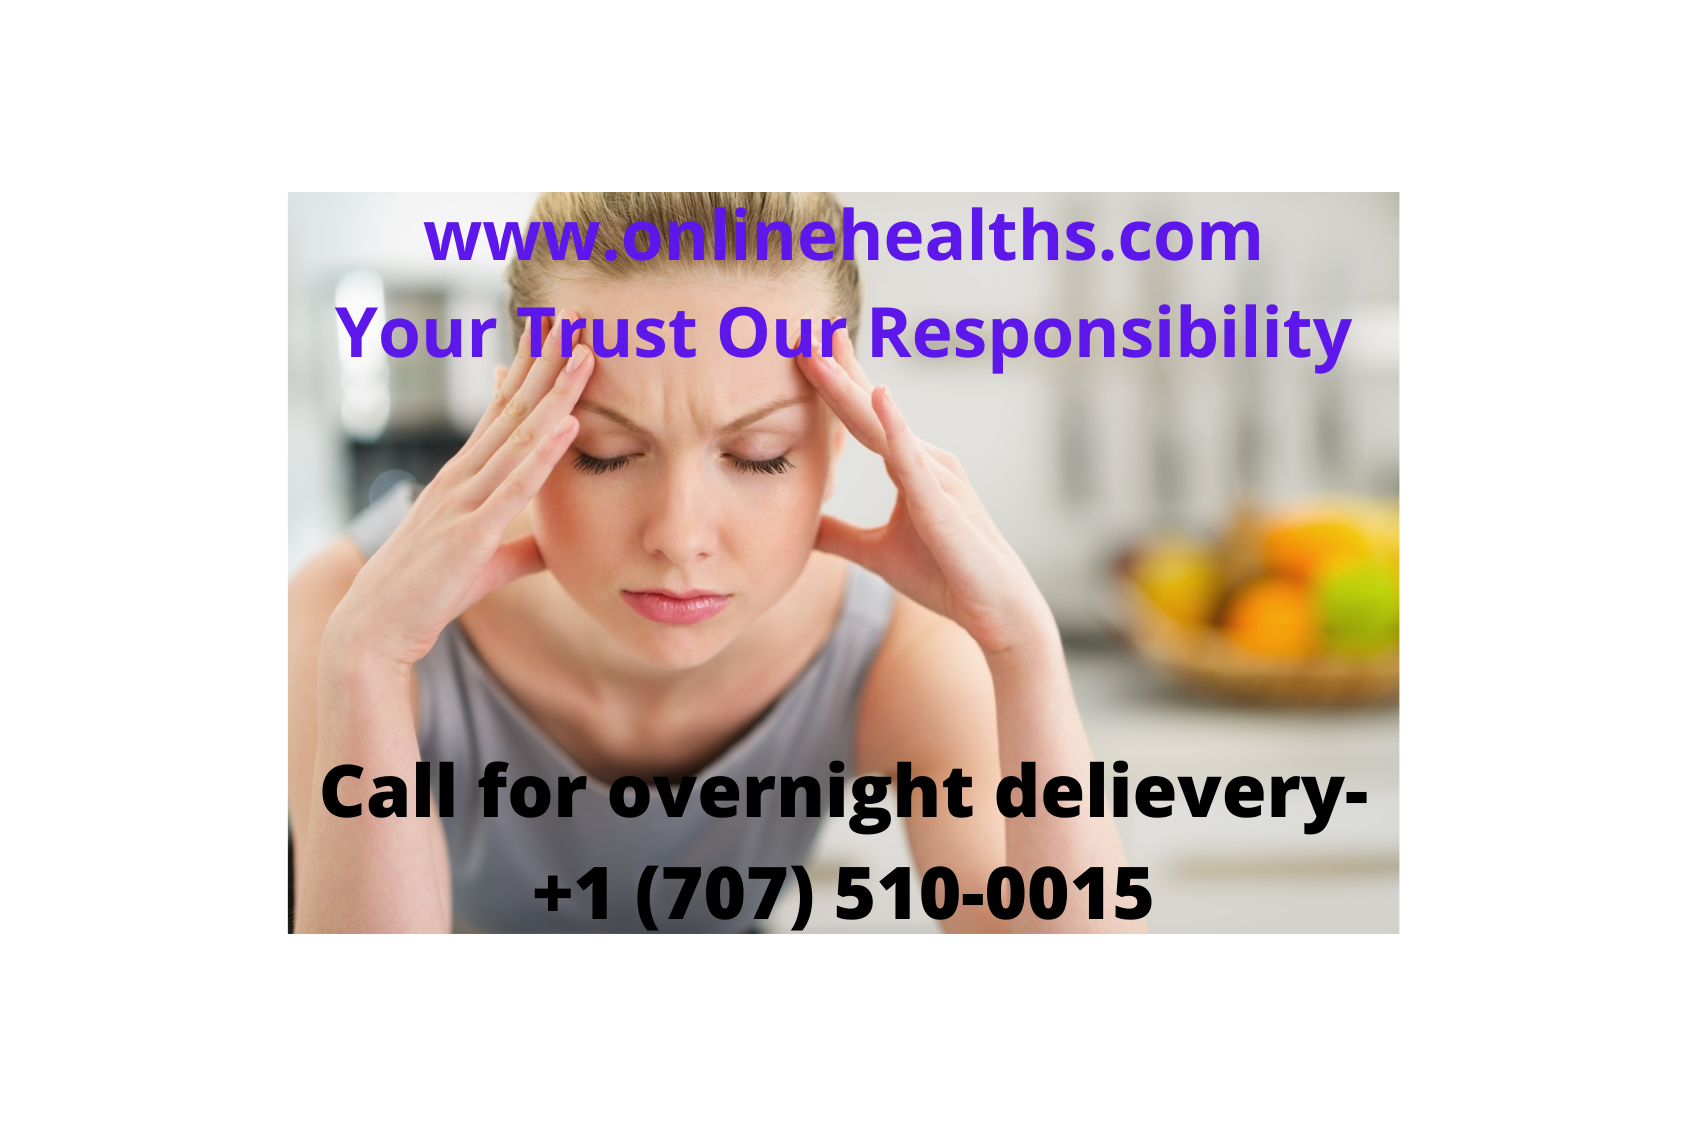 Call for overnight delievery 1 707 510 0015